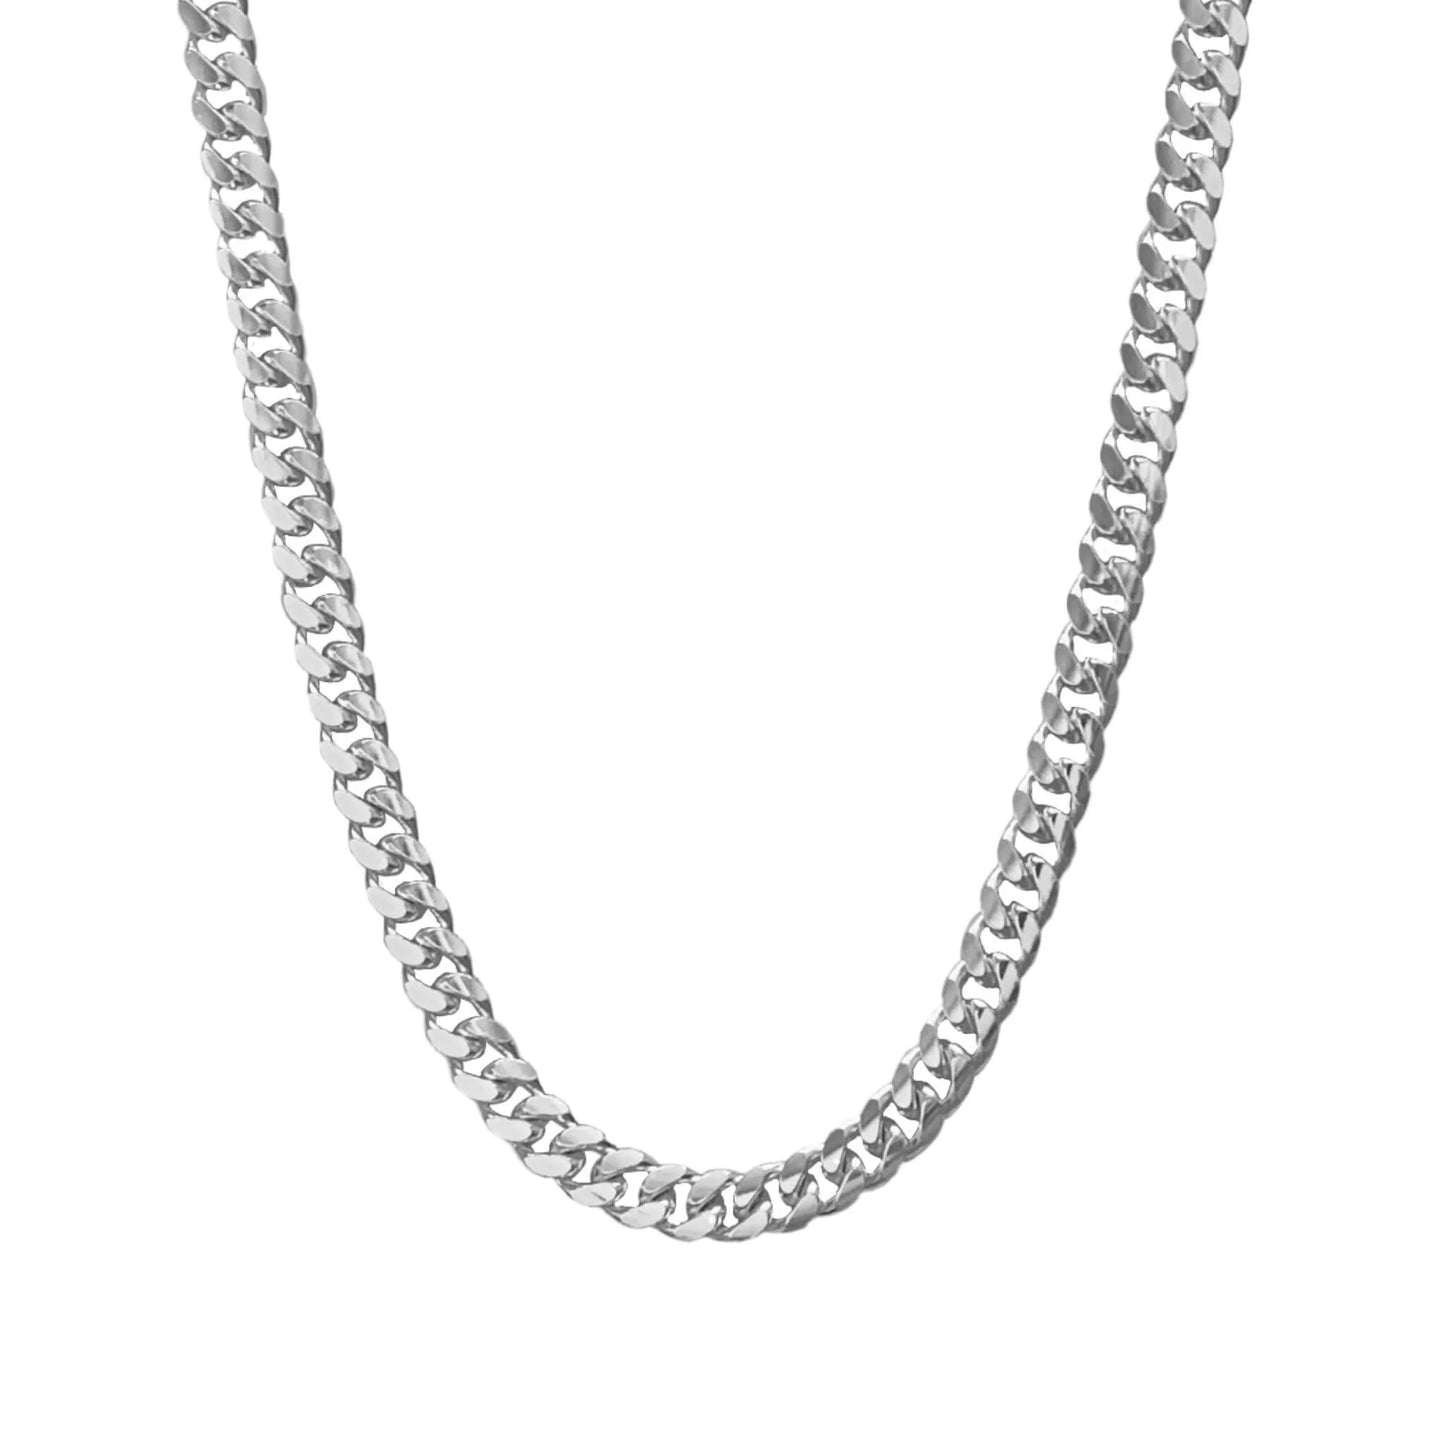 7.5mm Solid Curb (Cuban) Link Necklace - Italian Sterling Silver (925)